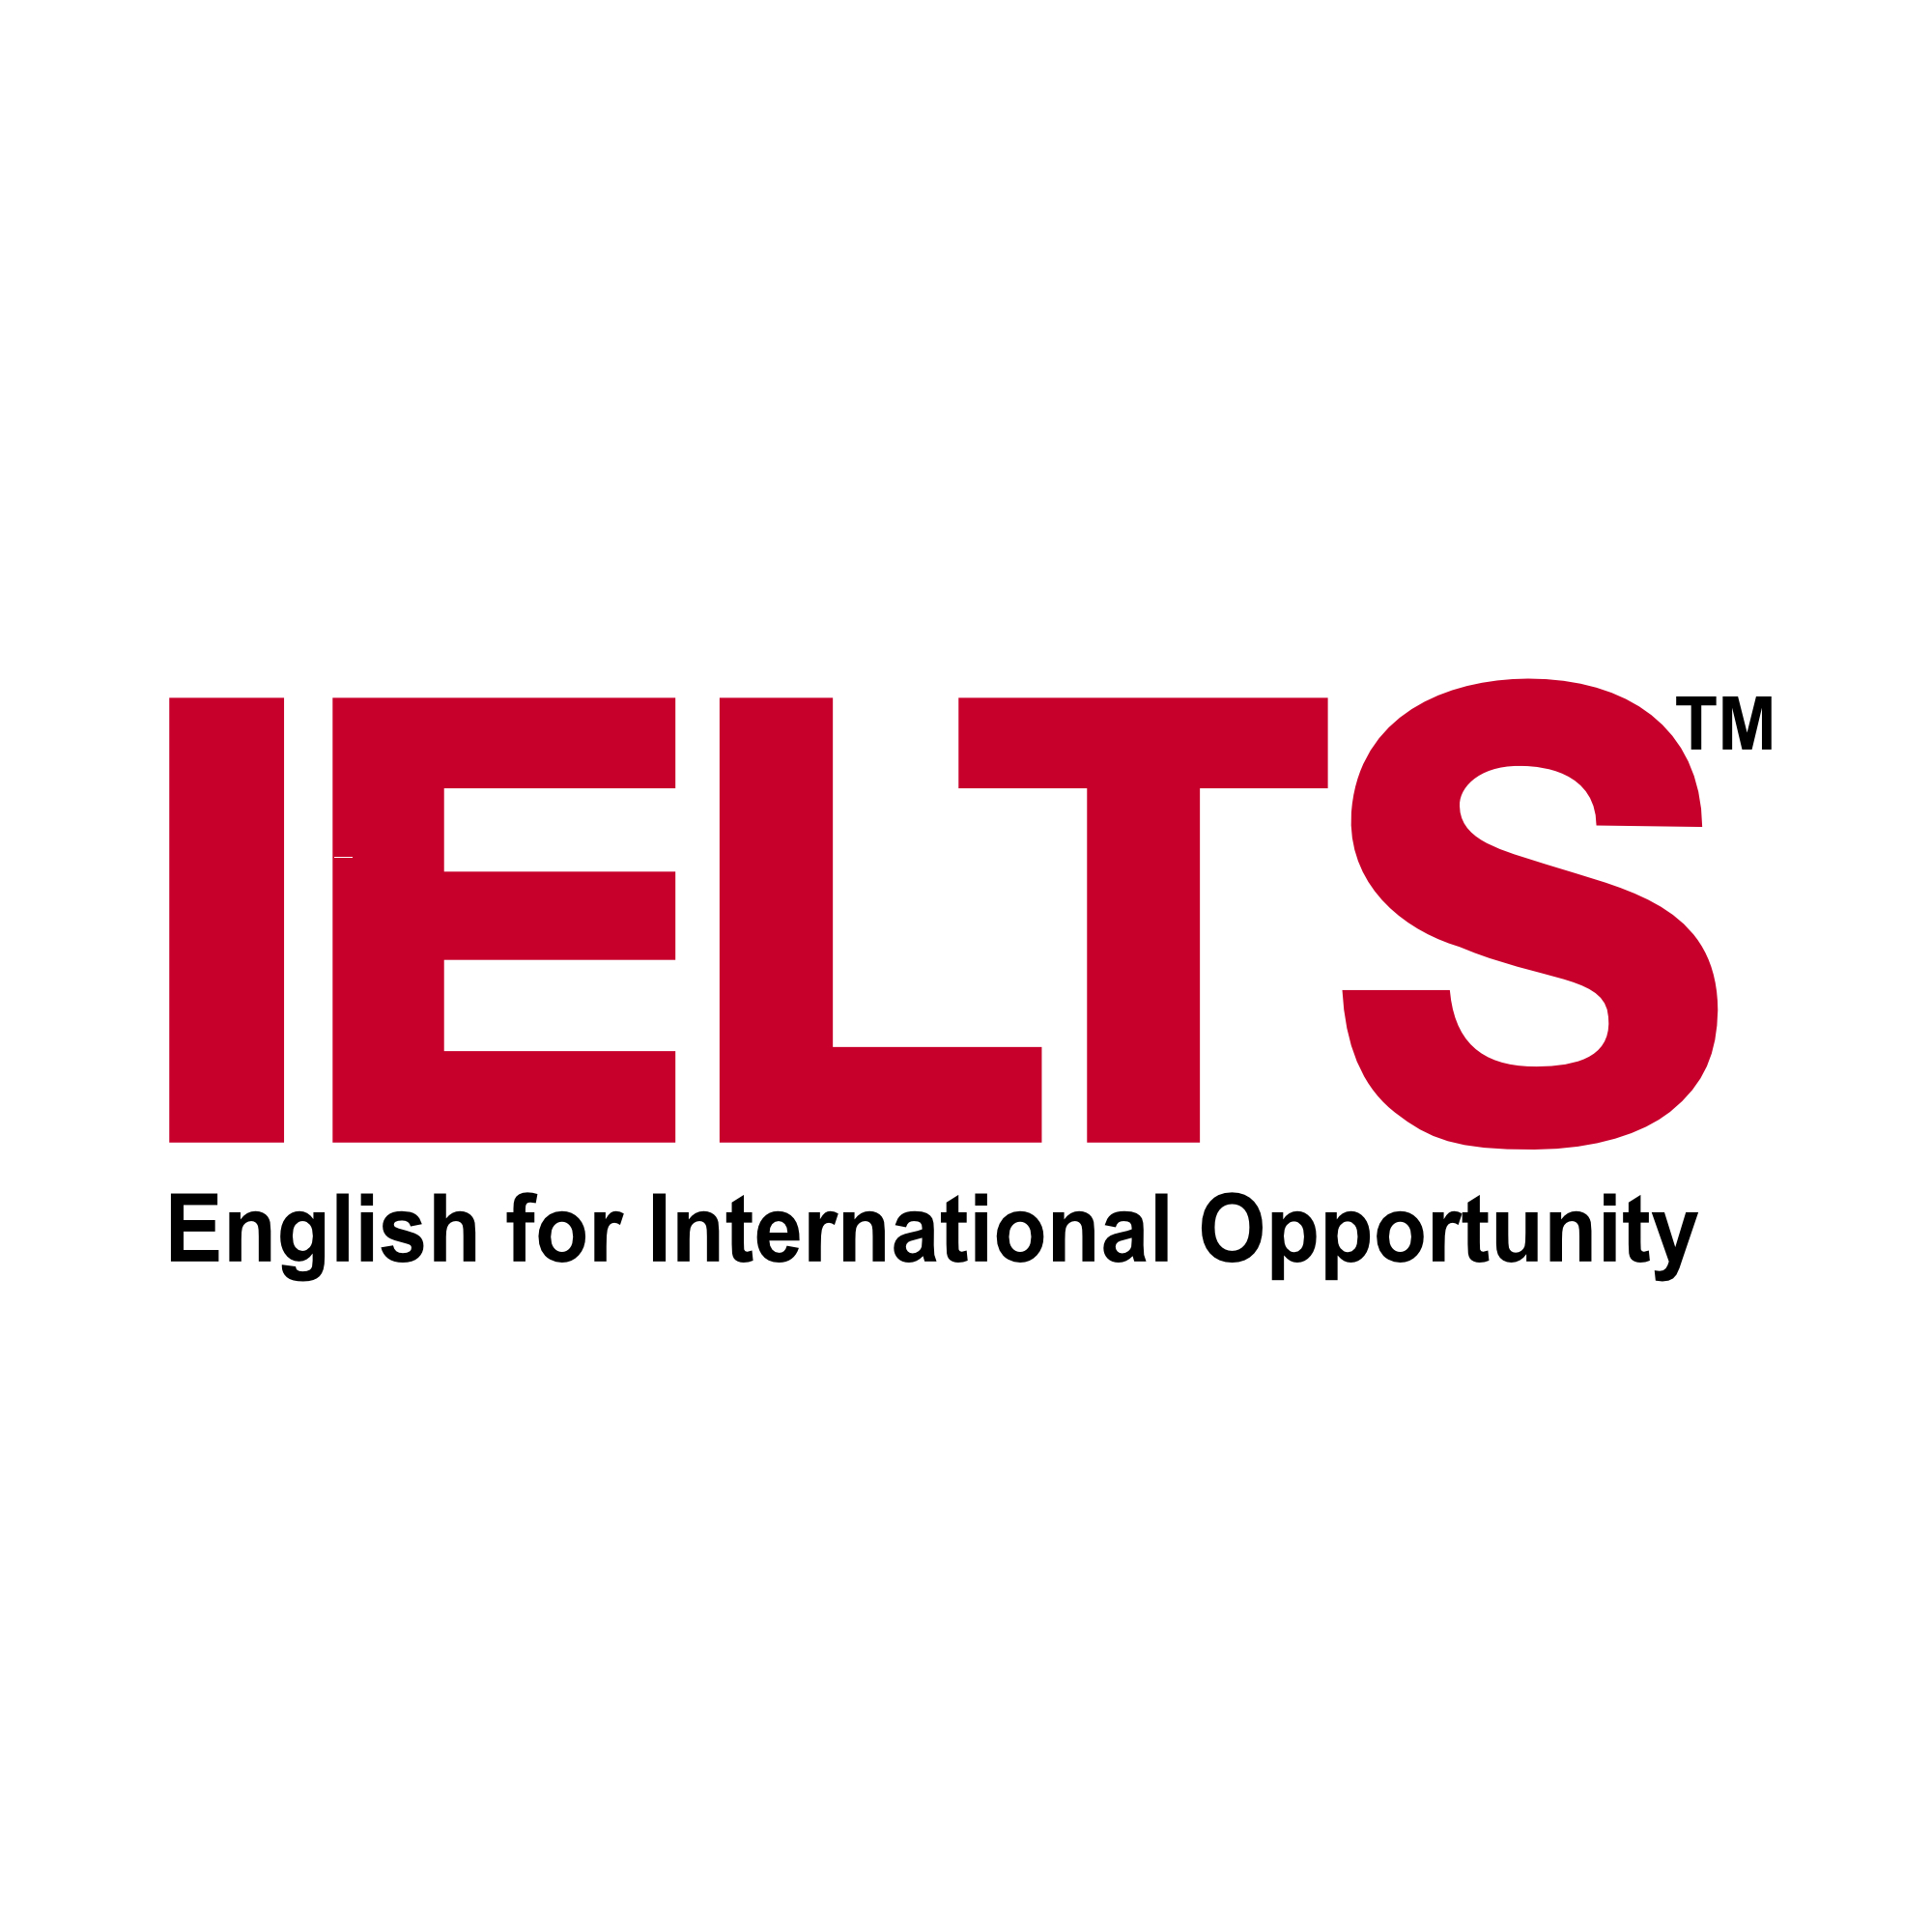 English for International Opportunity